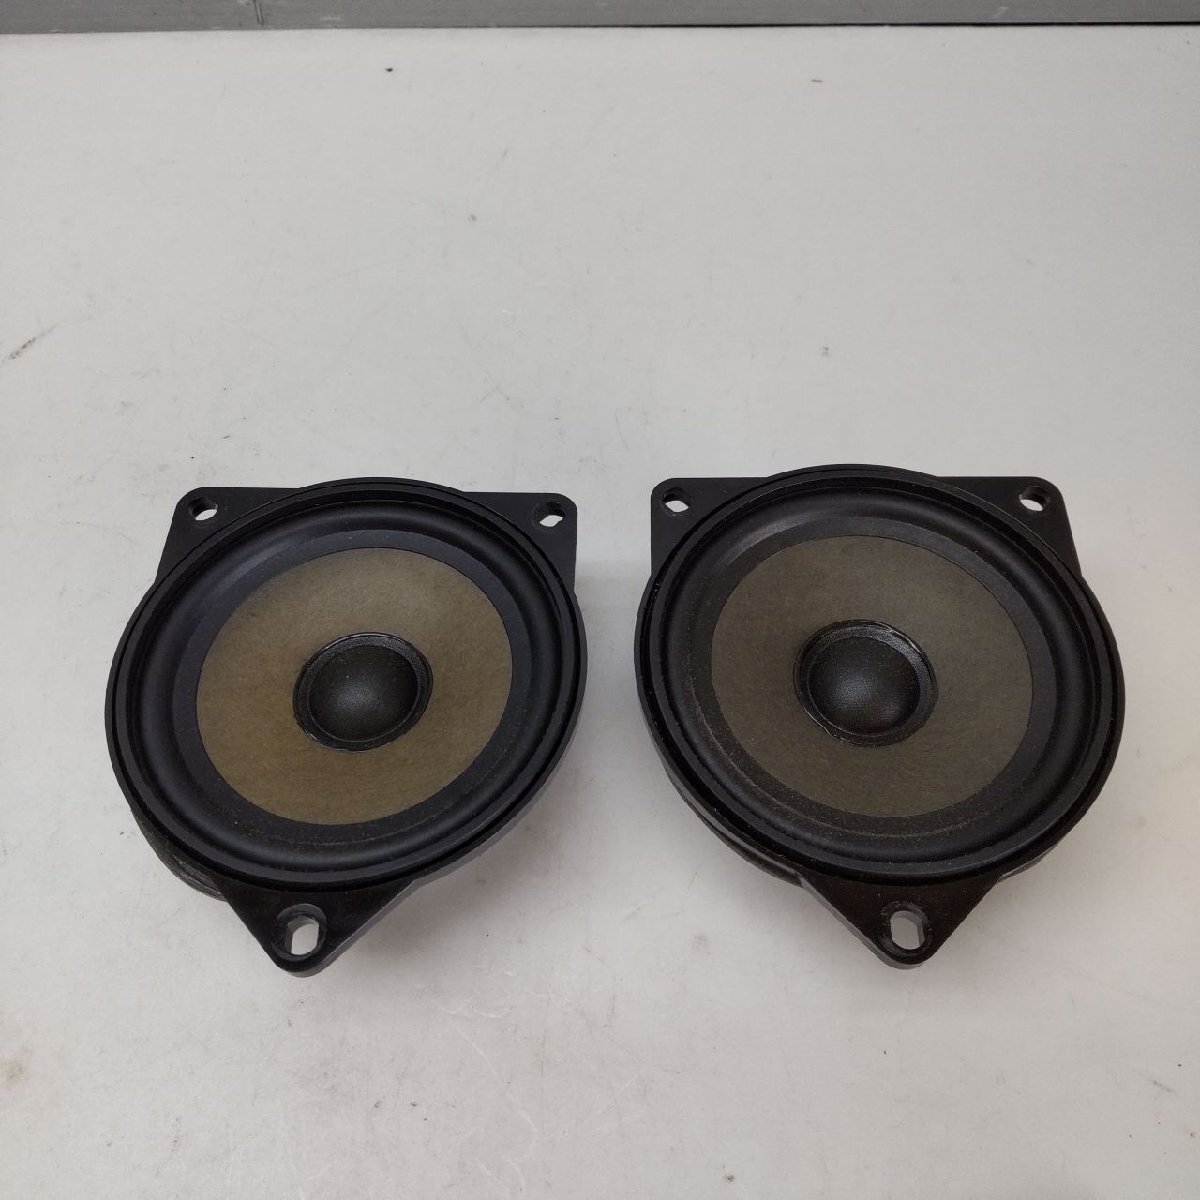 MF16S BMW Mini original speaker set 2 point 2Z5-5-2/24C3600* including in a package un- possible 